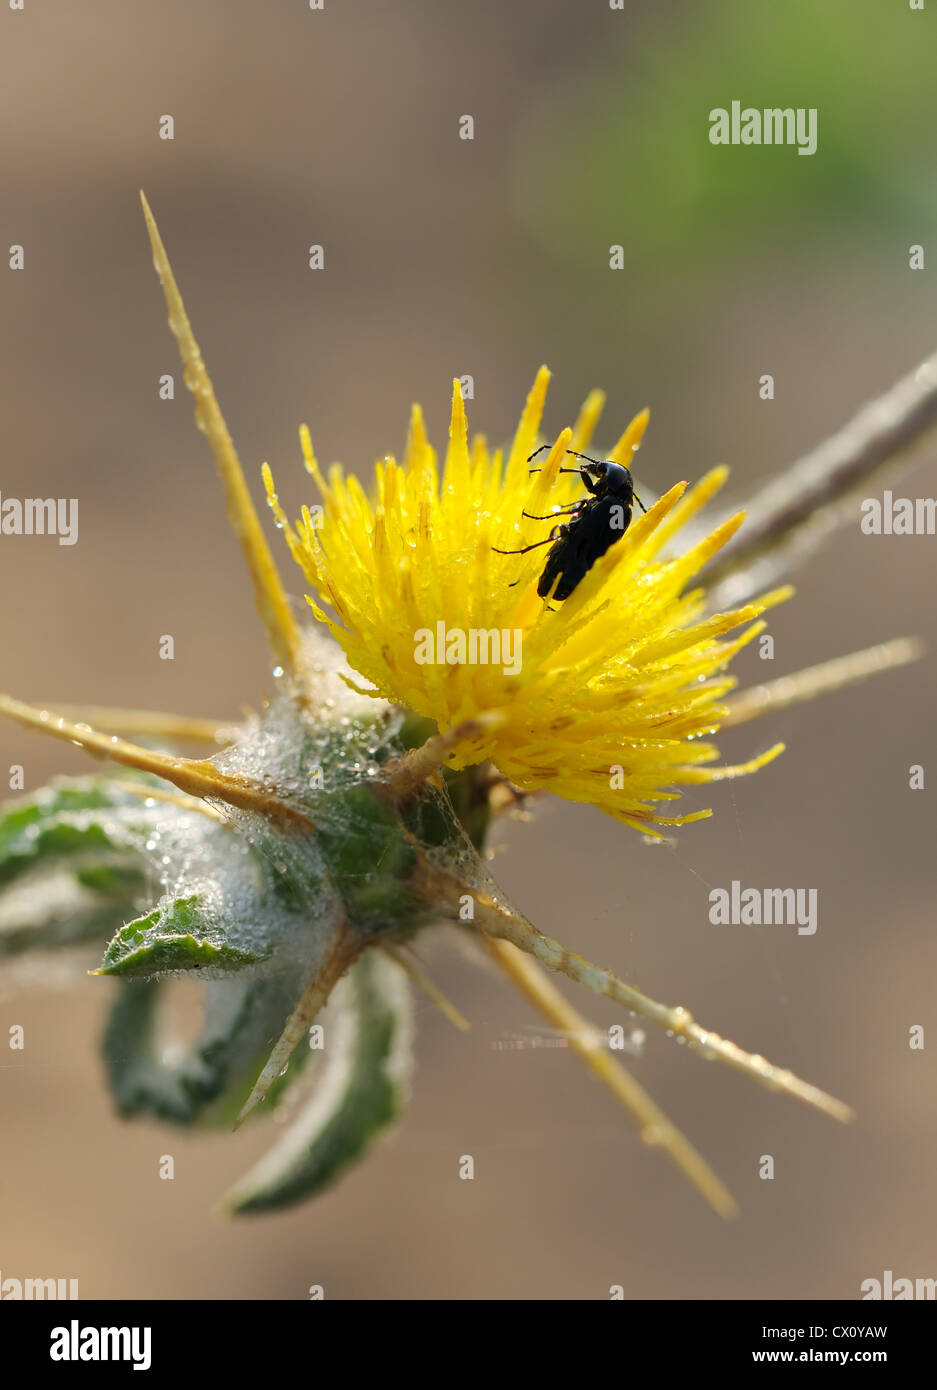 Black beetle on yellow flower of prickly plants. Stock Photo